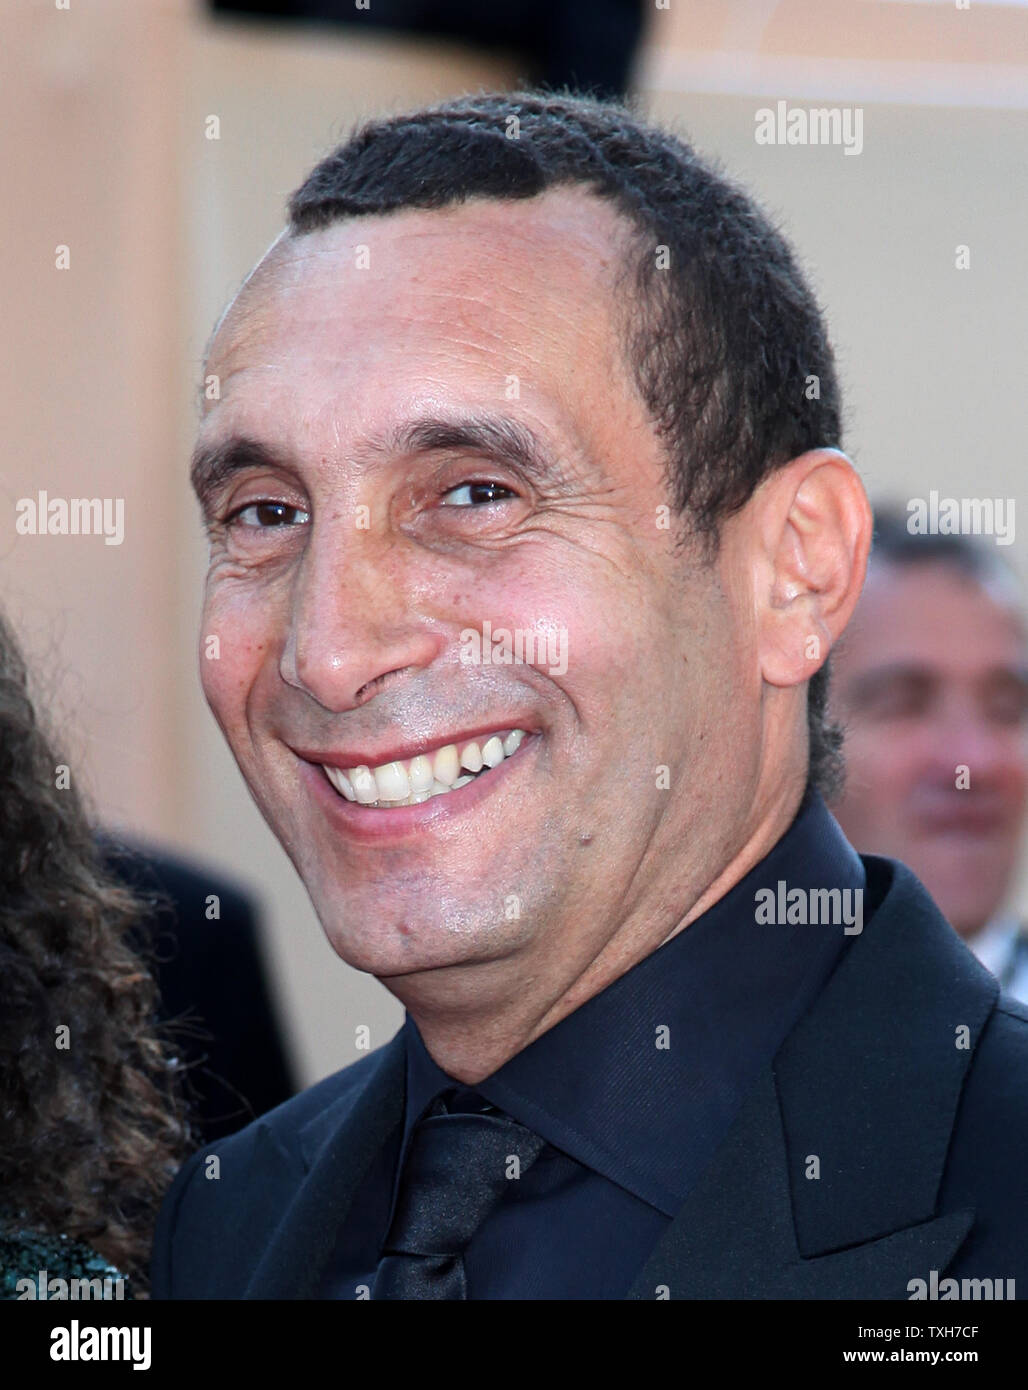 Zinedine Soualem arrives on the red carpet before the screening of the film 'La Source des Femmes (The Source)' during the 64th annual Cannes International Film Festival in Cannes, France on May 21, 2011.  UPI/David Silpa Stock Photo